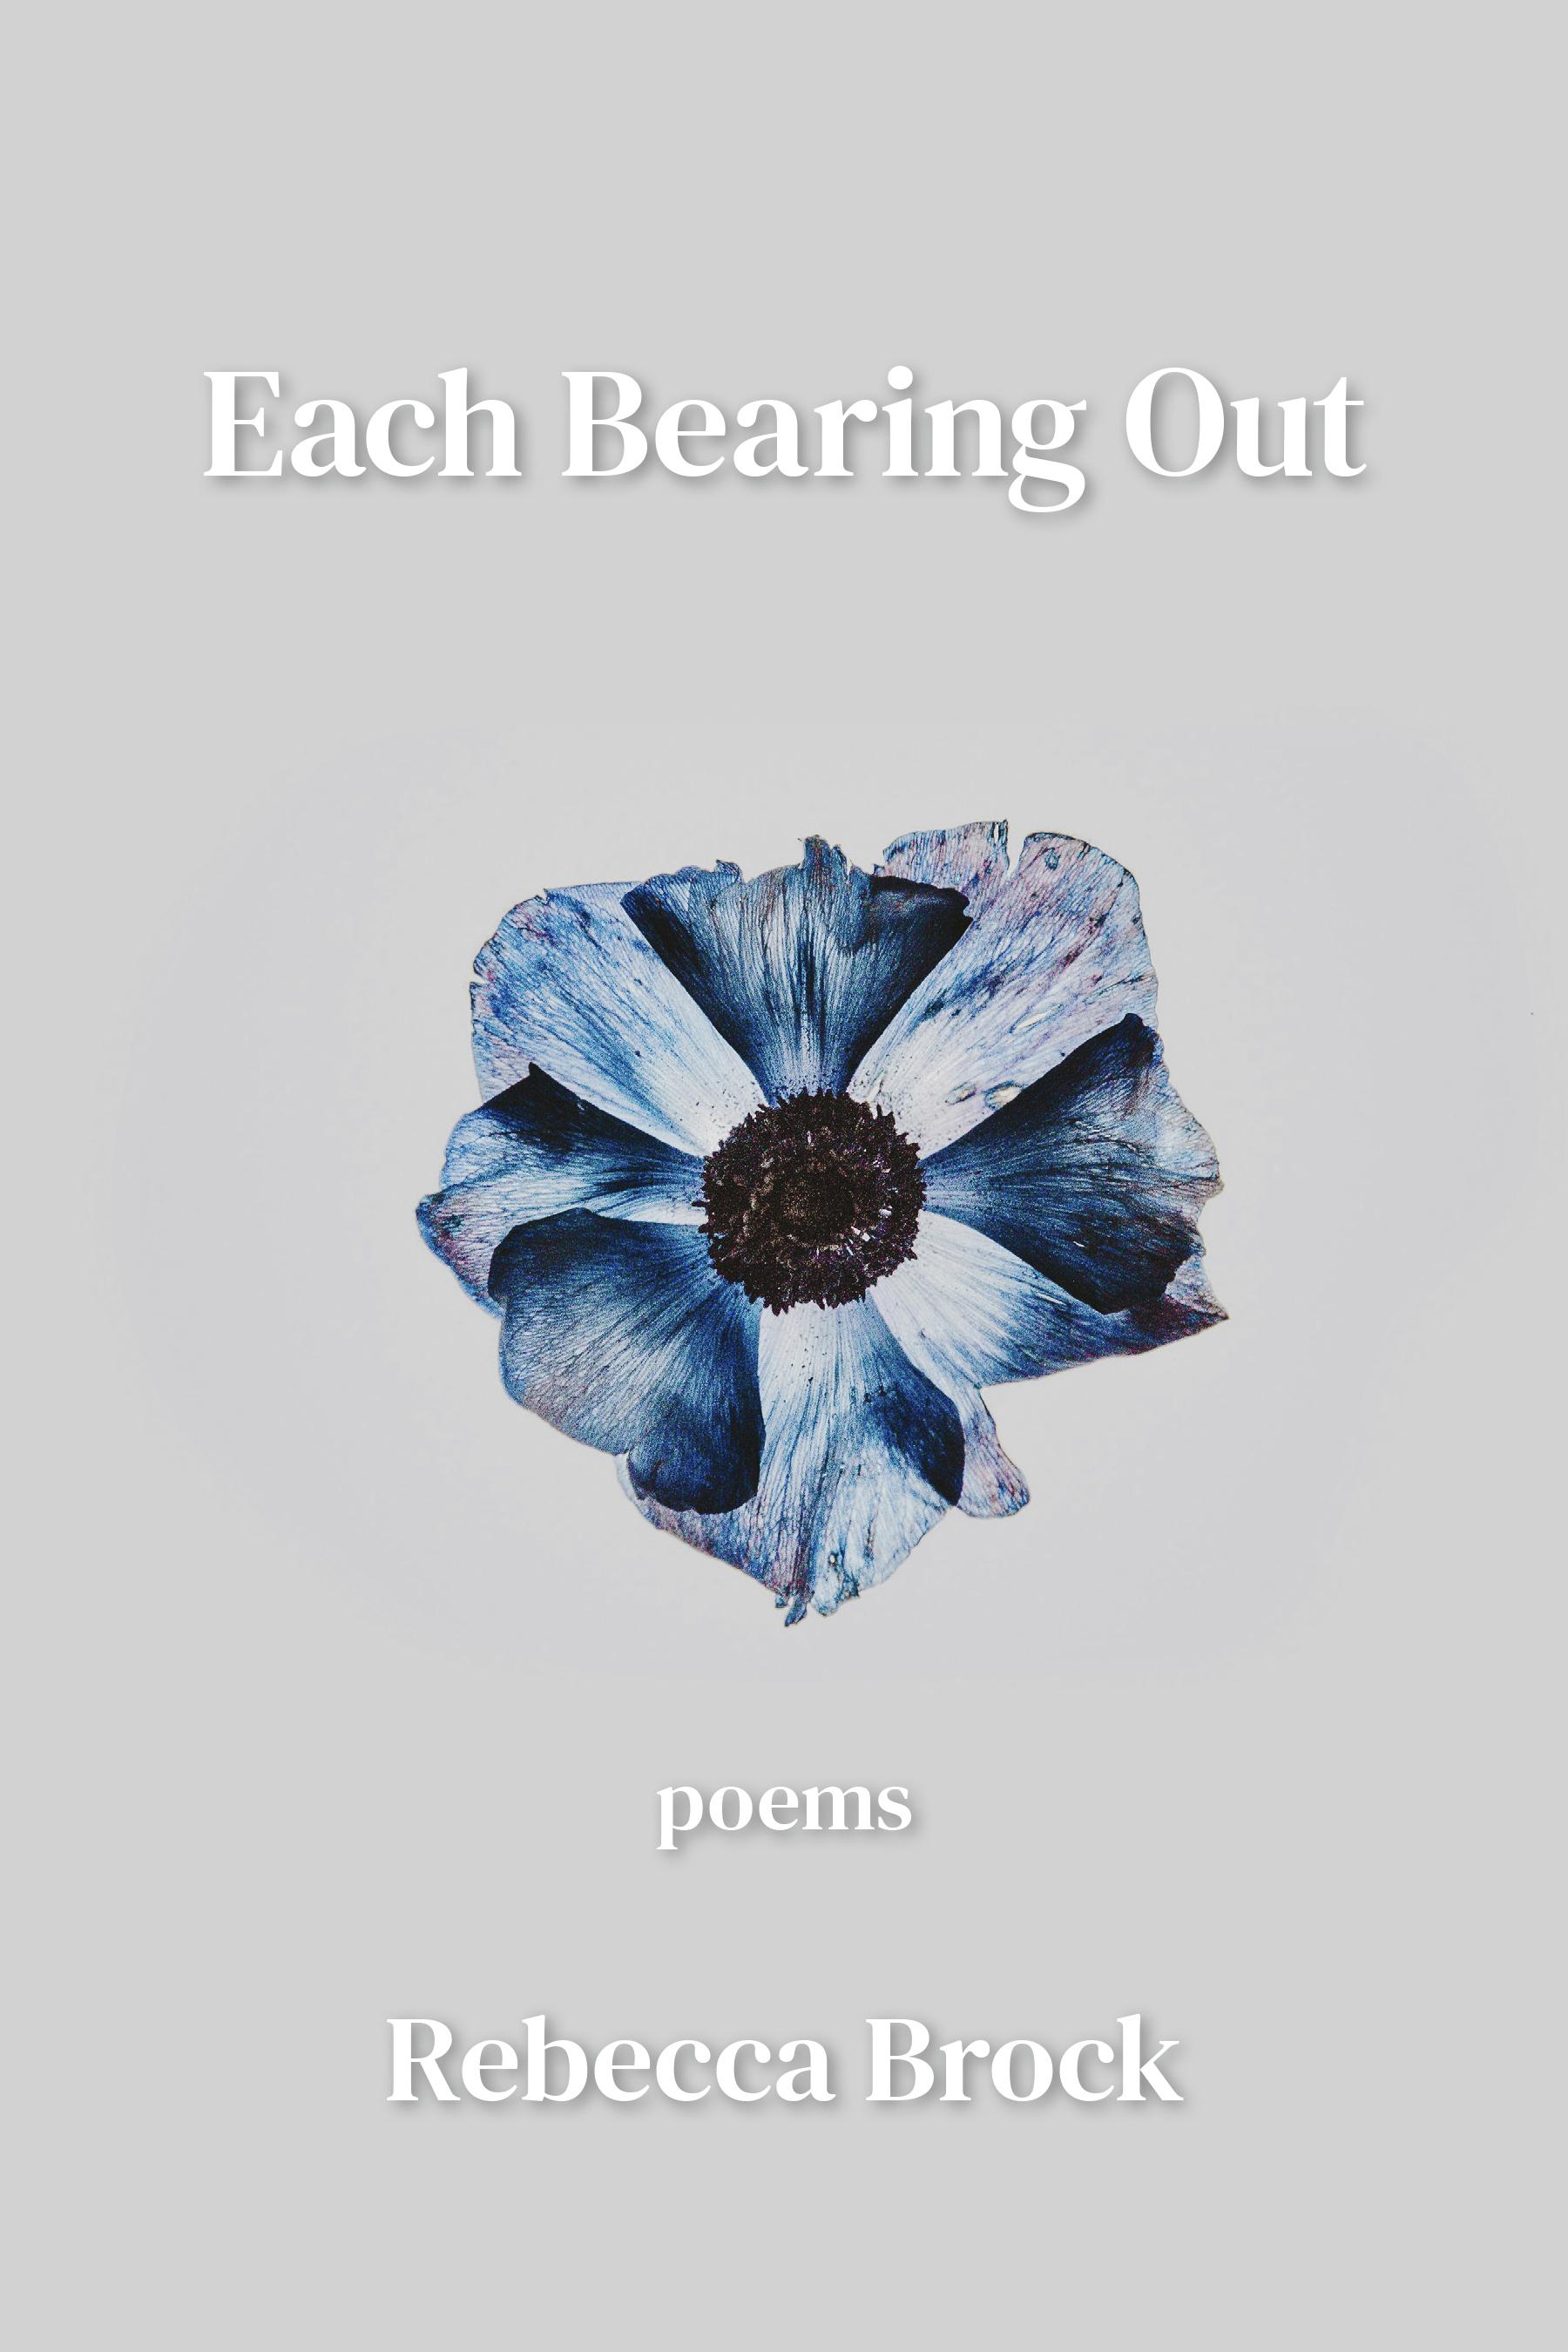 Book cover of "Each Bearing Out" by RB